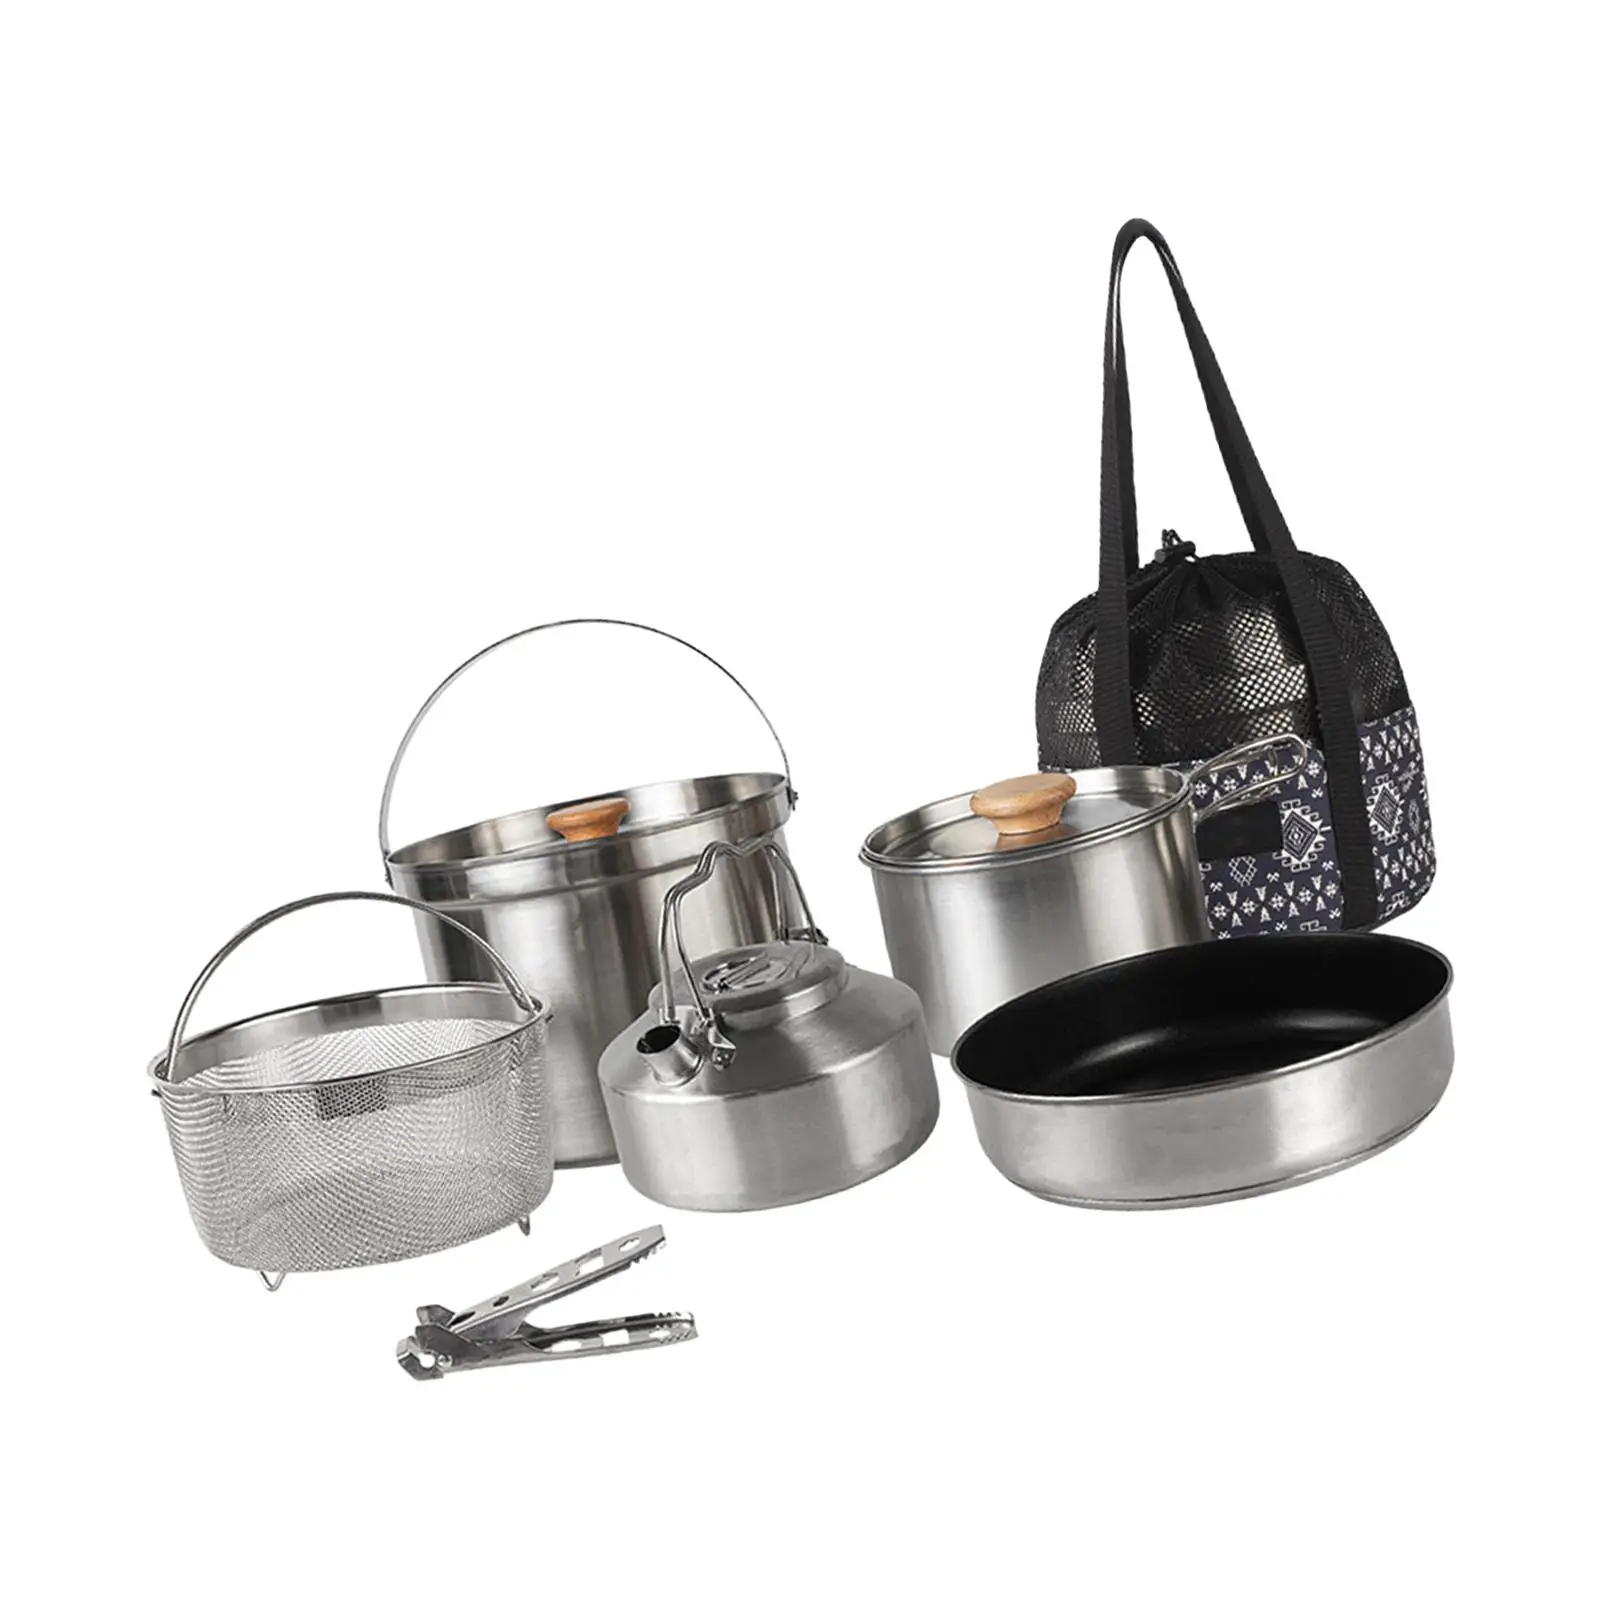 Pan Kettle Lightweight Camping Cookware Set for Home Backpacking Travel